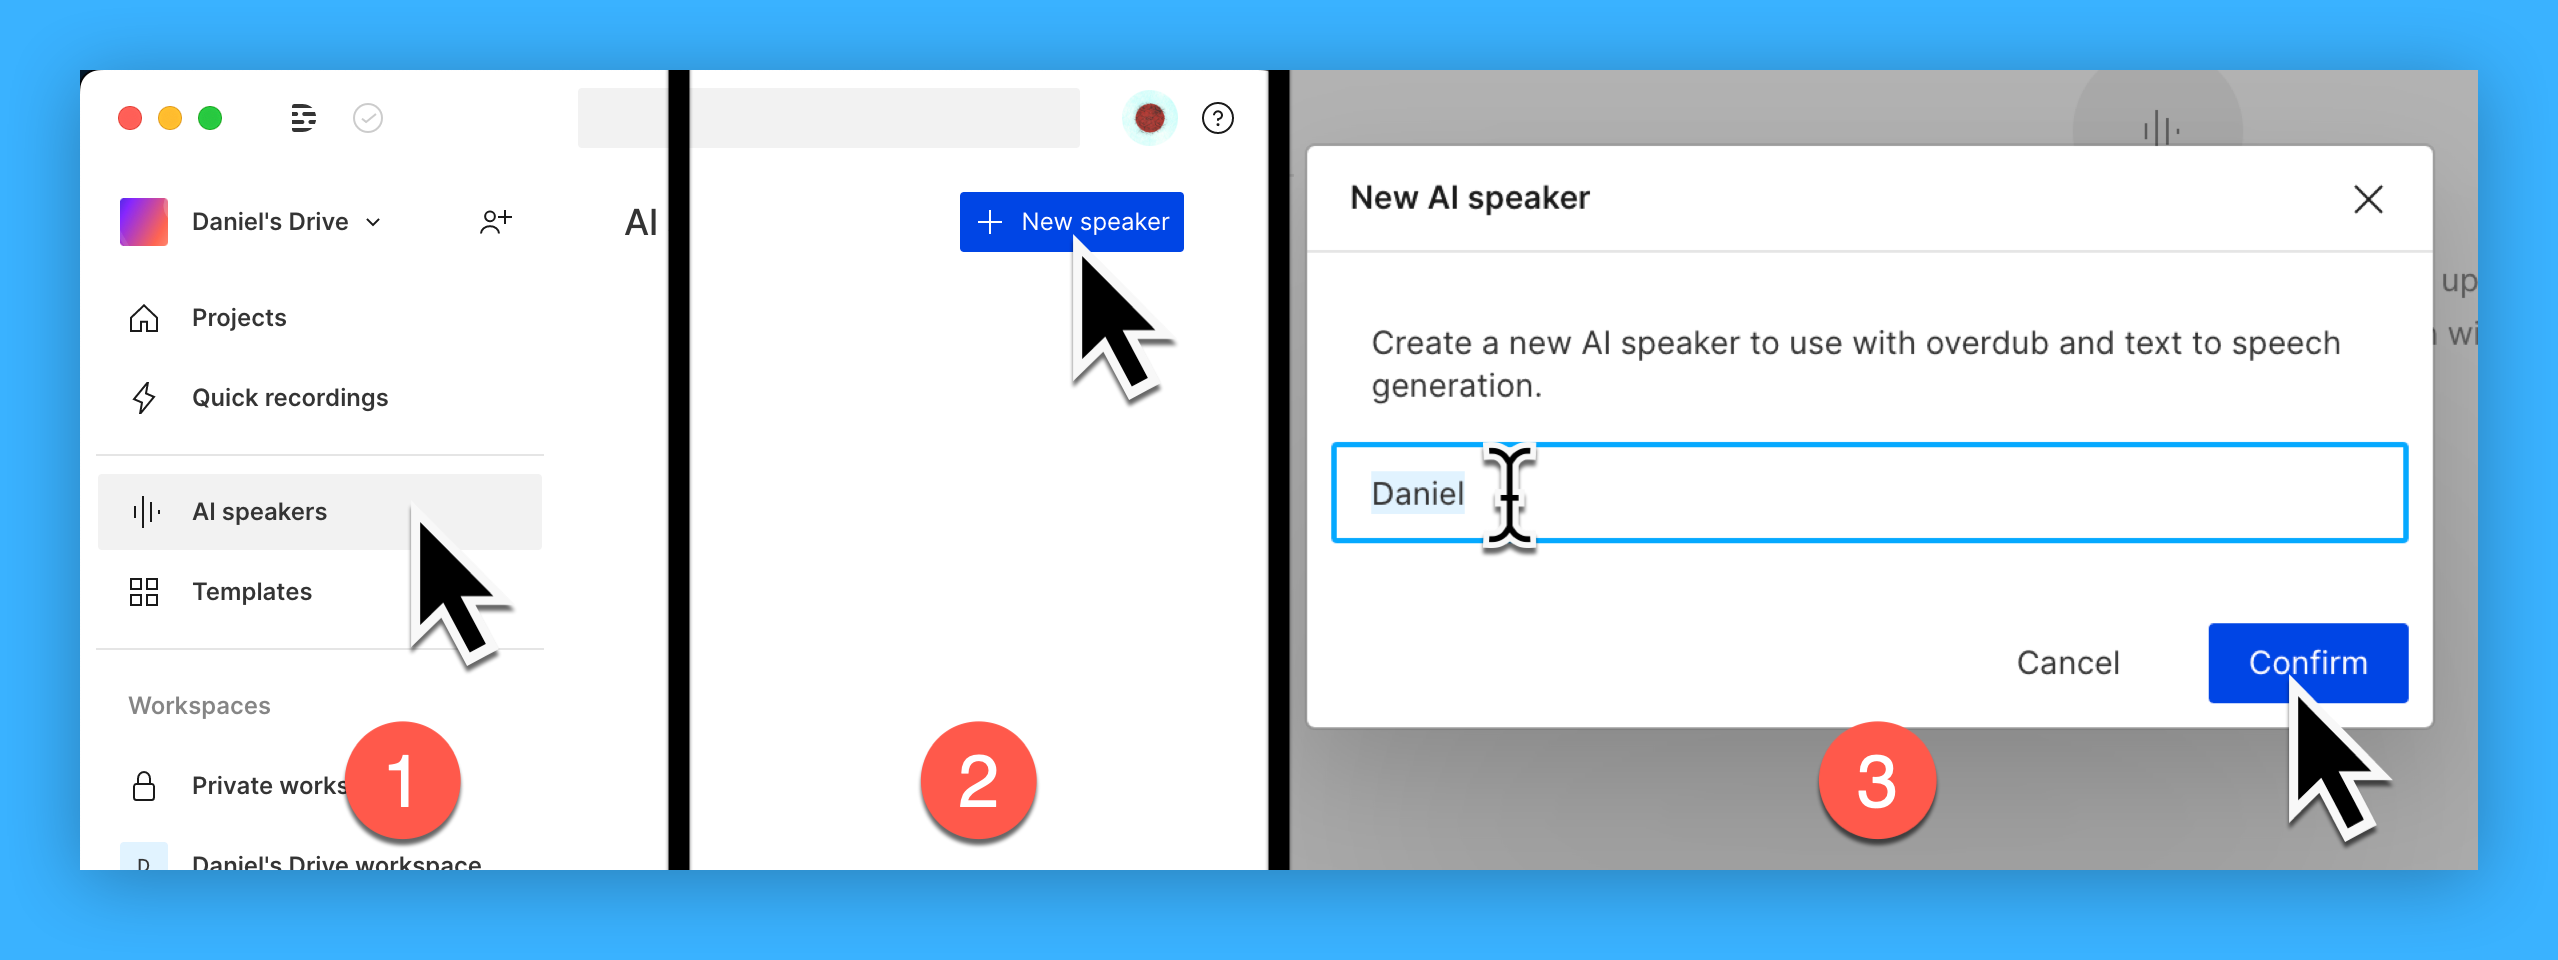 3 screenshots showing the steps for creating an AI Speaker from the Drive View